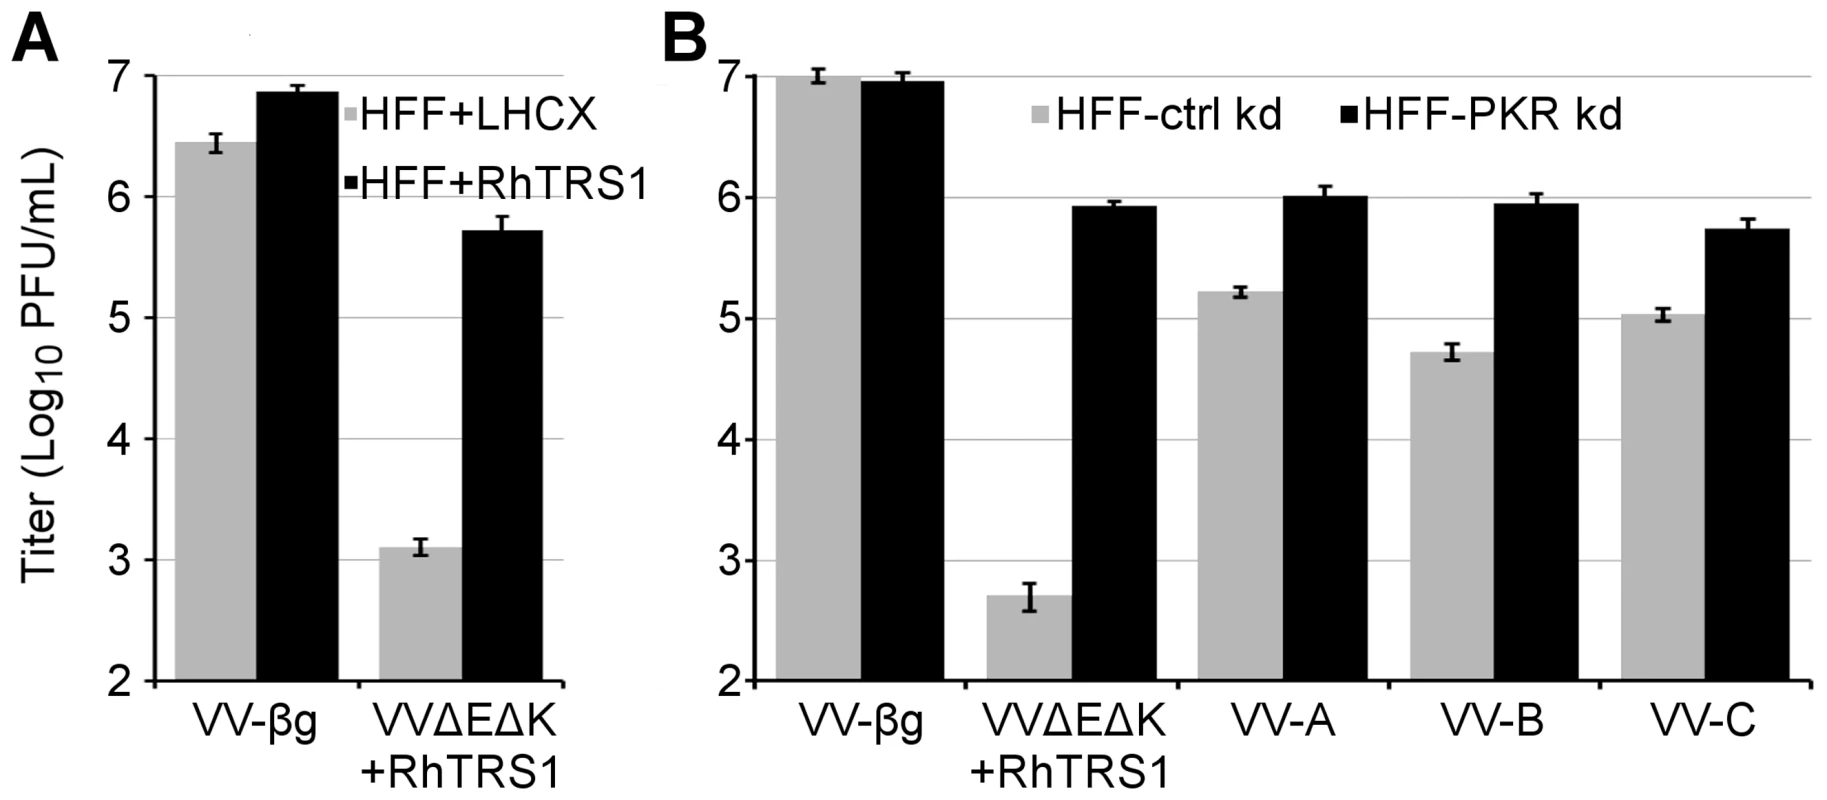 RhTRS1 overexpression or PKR knockdown permits efficient VVΔEΔK+RhTRS1 replication in HFF.